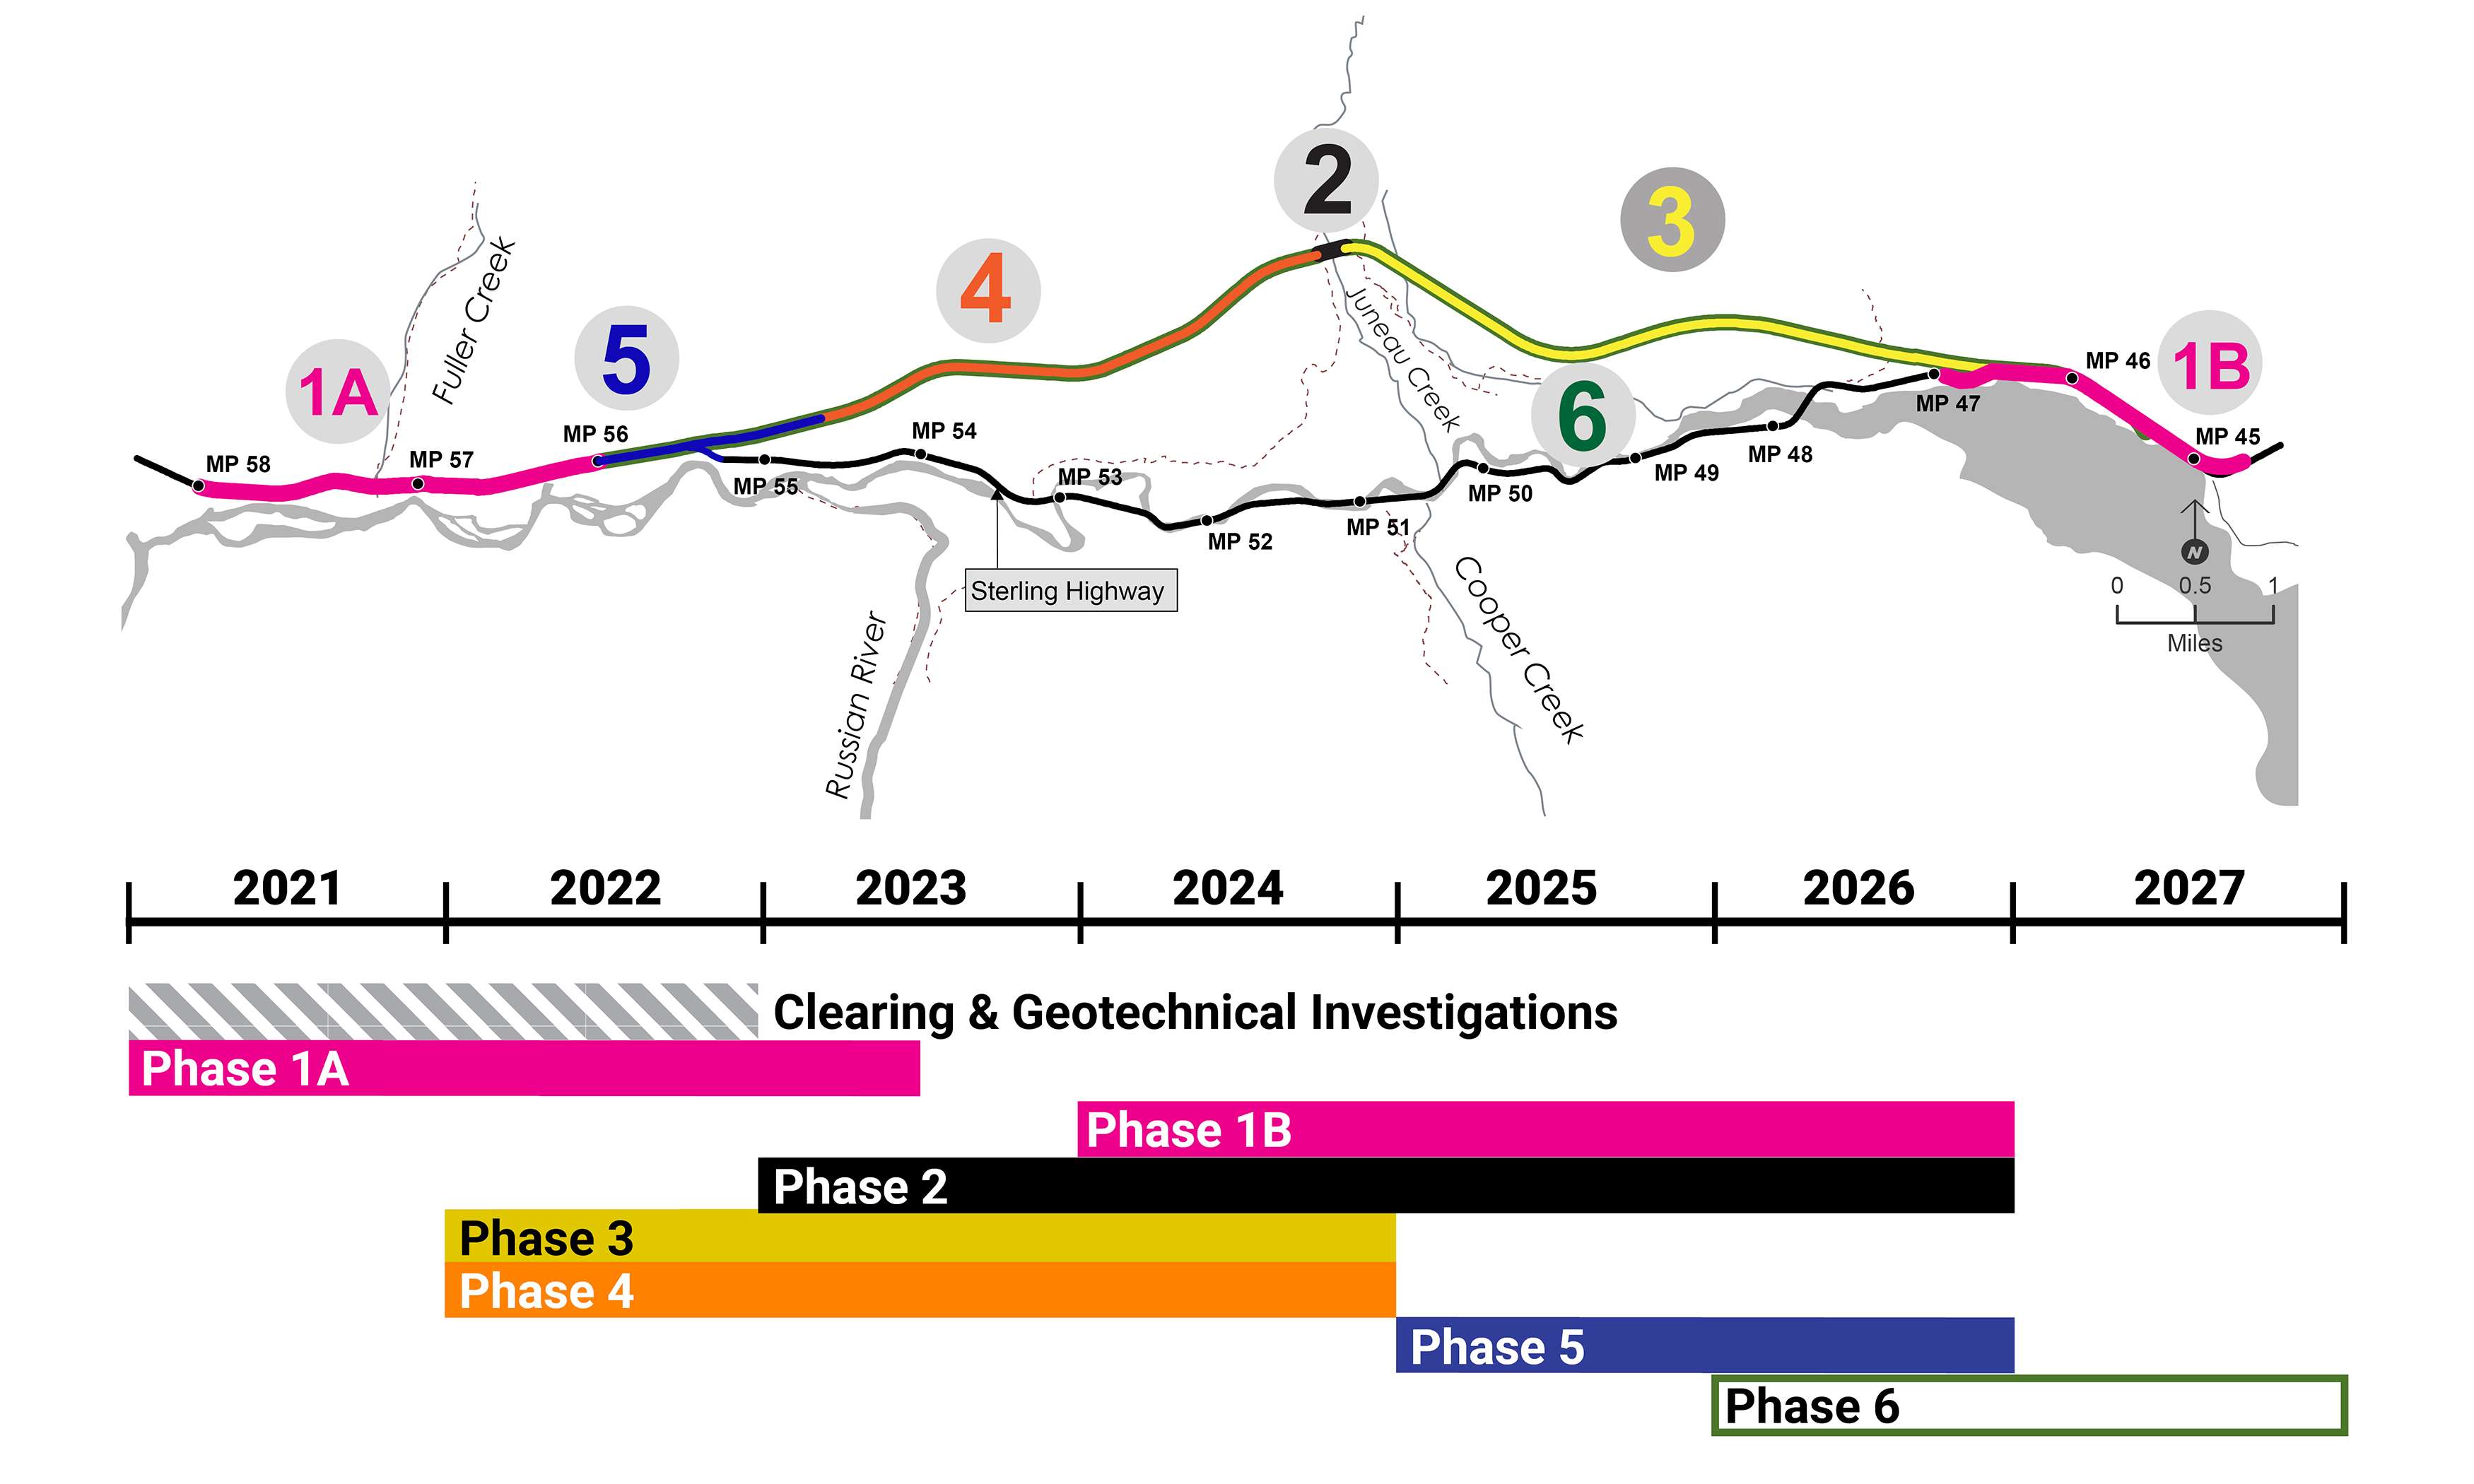 Project Schedule Phases 1 - Phase 6. Phase 1A Design 2019–2020, Construction 2021–2023, Phase 1B
Design 2019–2022, Construction 2024–2026, Phase 2 Design 2020–2023, Construction 2023–2026, Pioneer Roads Design 2021 – 2022, Construction 2022, Phases 3–4 Design 2021 – 2022, Construction 2022–2024, Phase 5 Design 2022–2024, Construction 2025–2026, and Phase 6, Design 2022–2025, Construction 2026–2027.